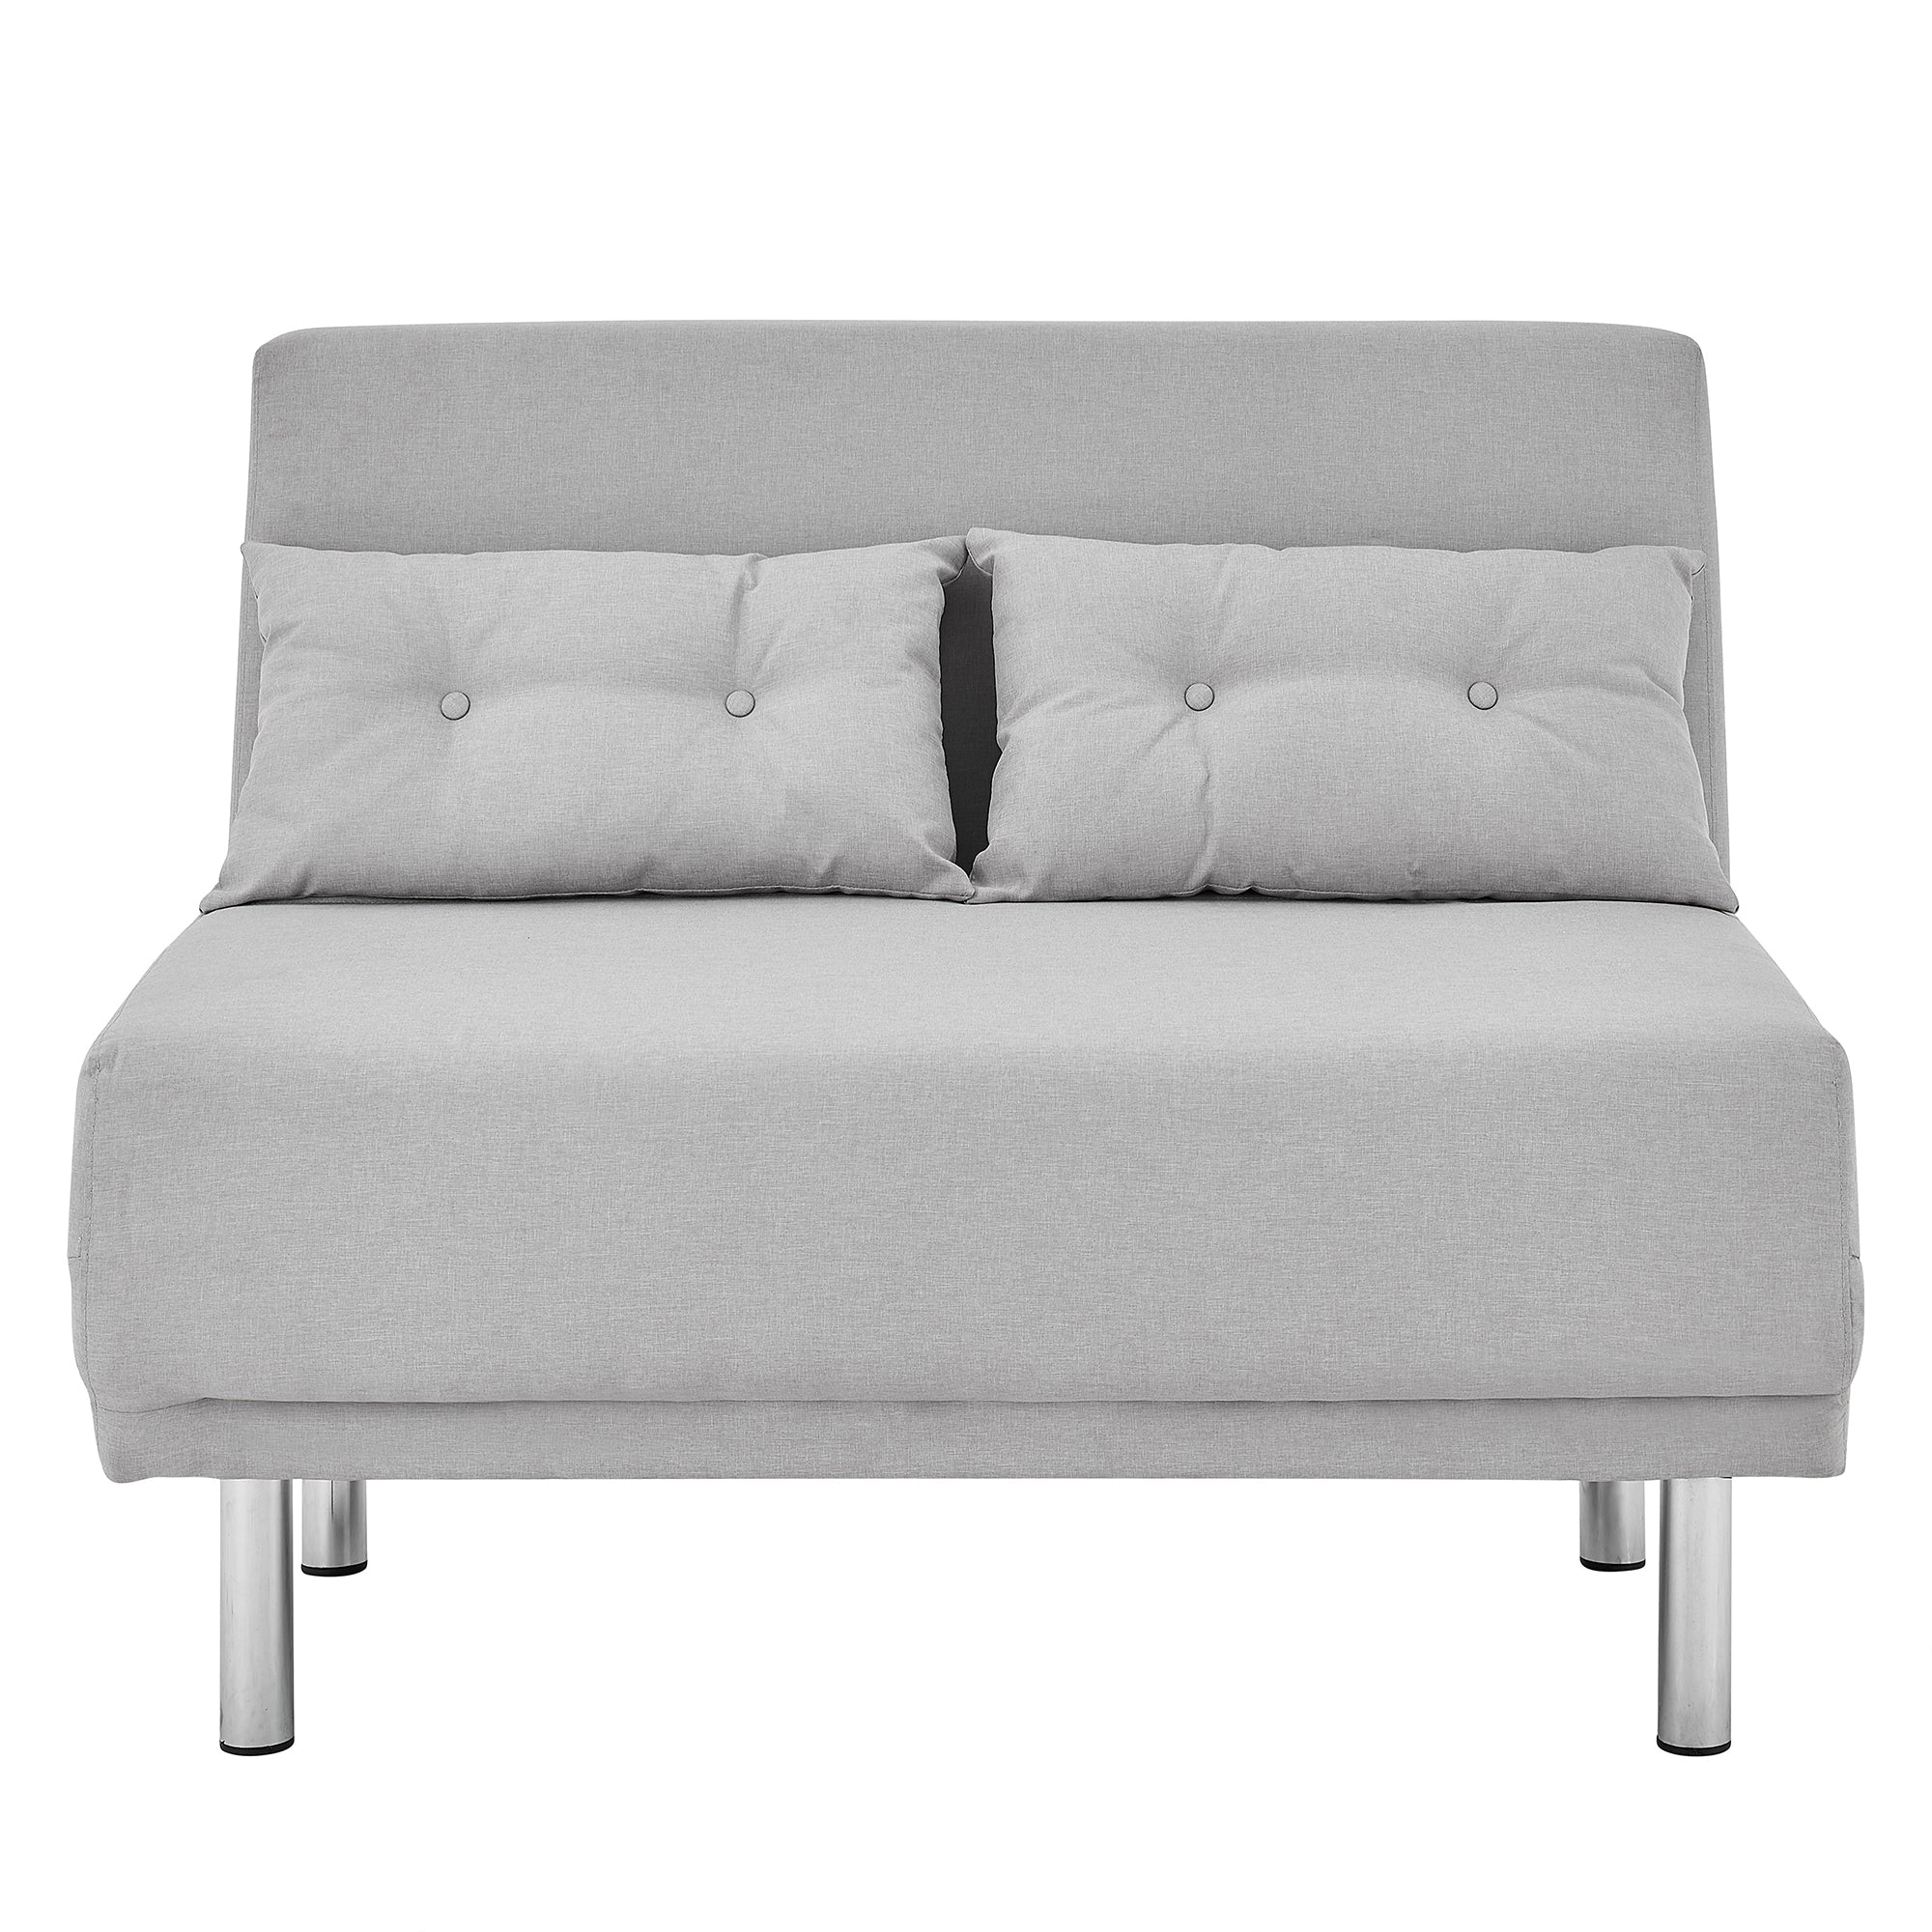 ALGO 2-Seater Small Double Folding Sofa Bed with Cushion Grey Fabric